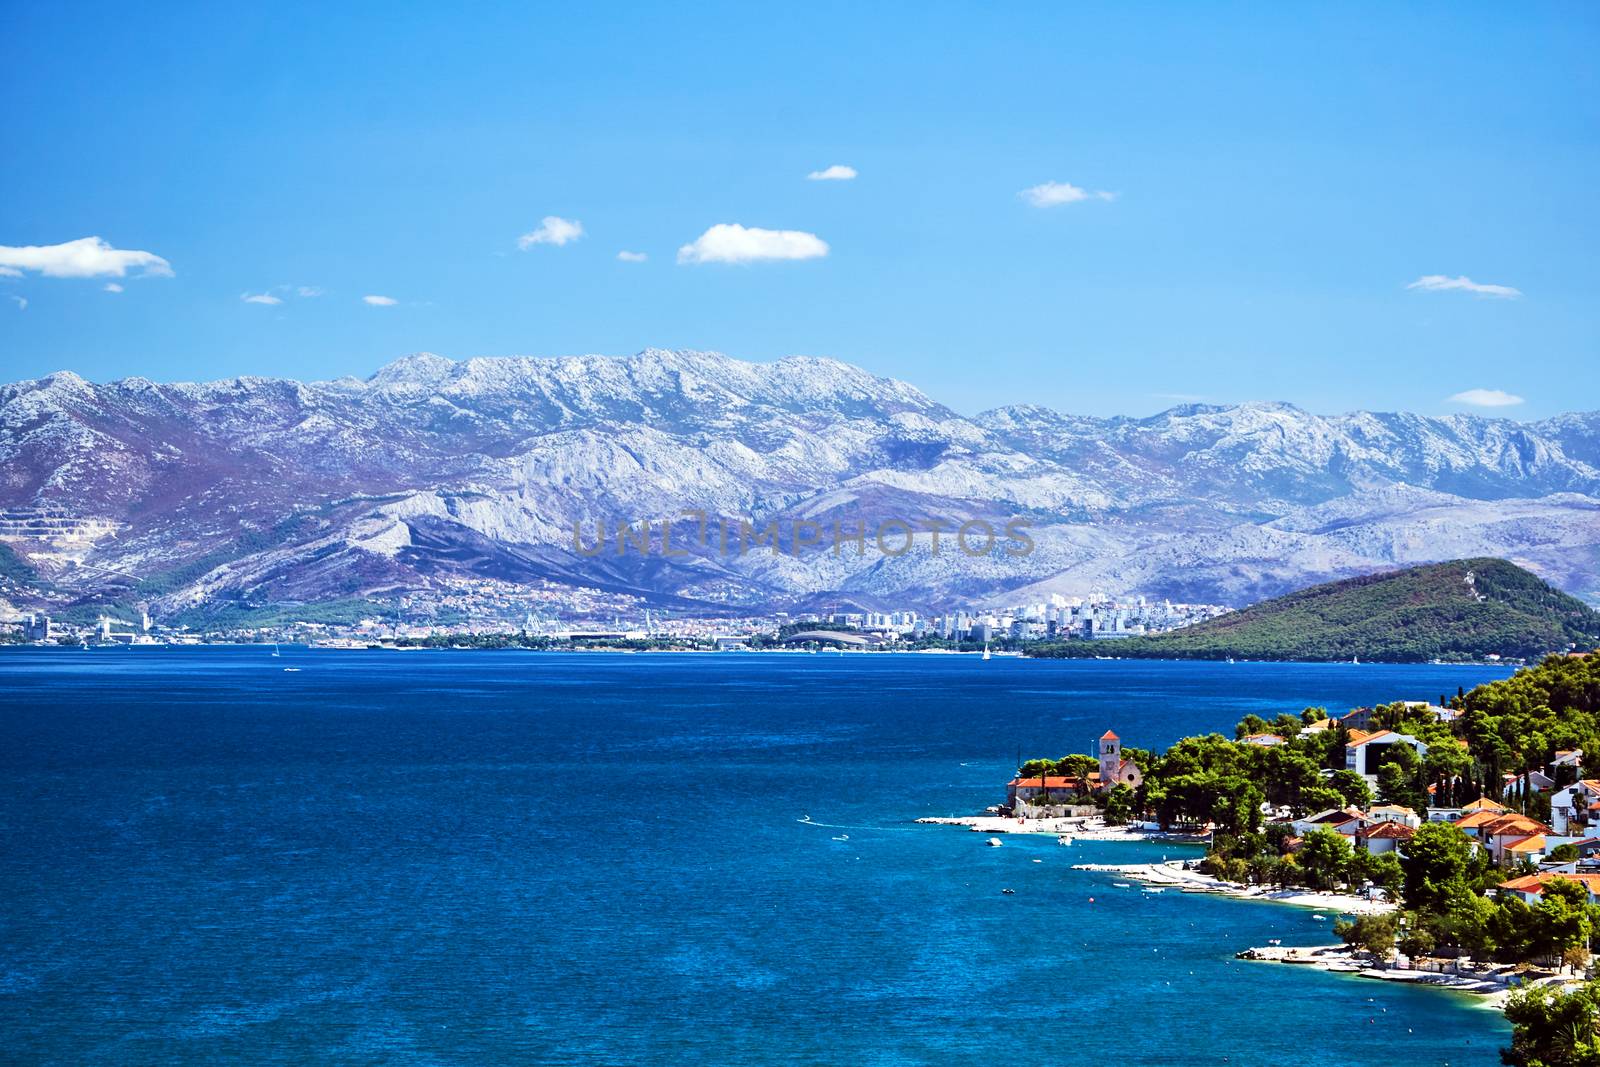 Landscape with the sea coast, mountains and city of Split in Croatia